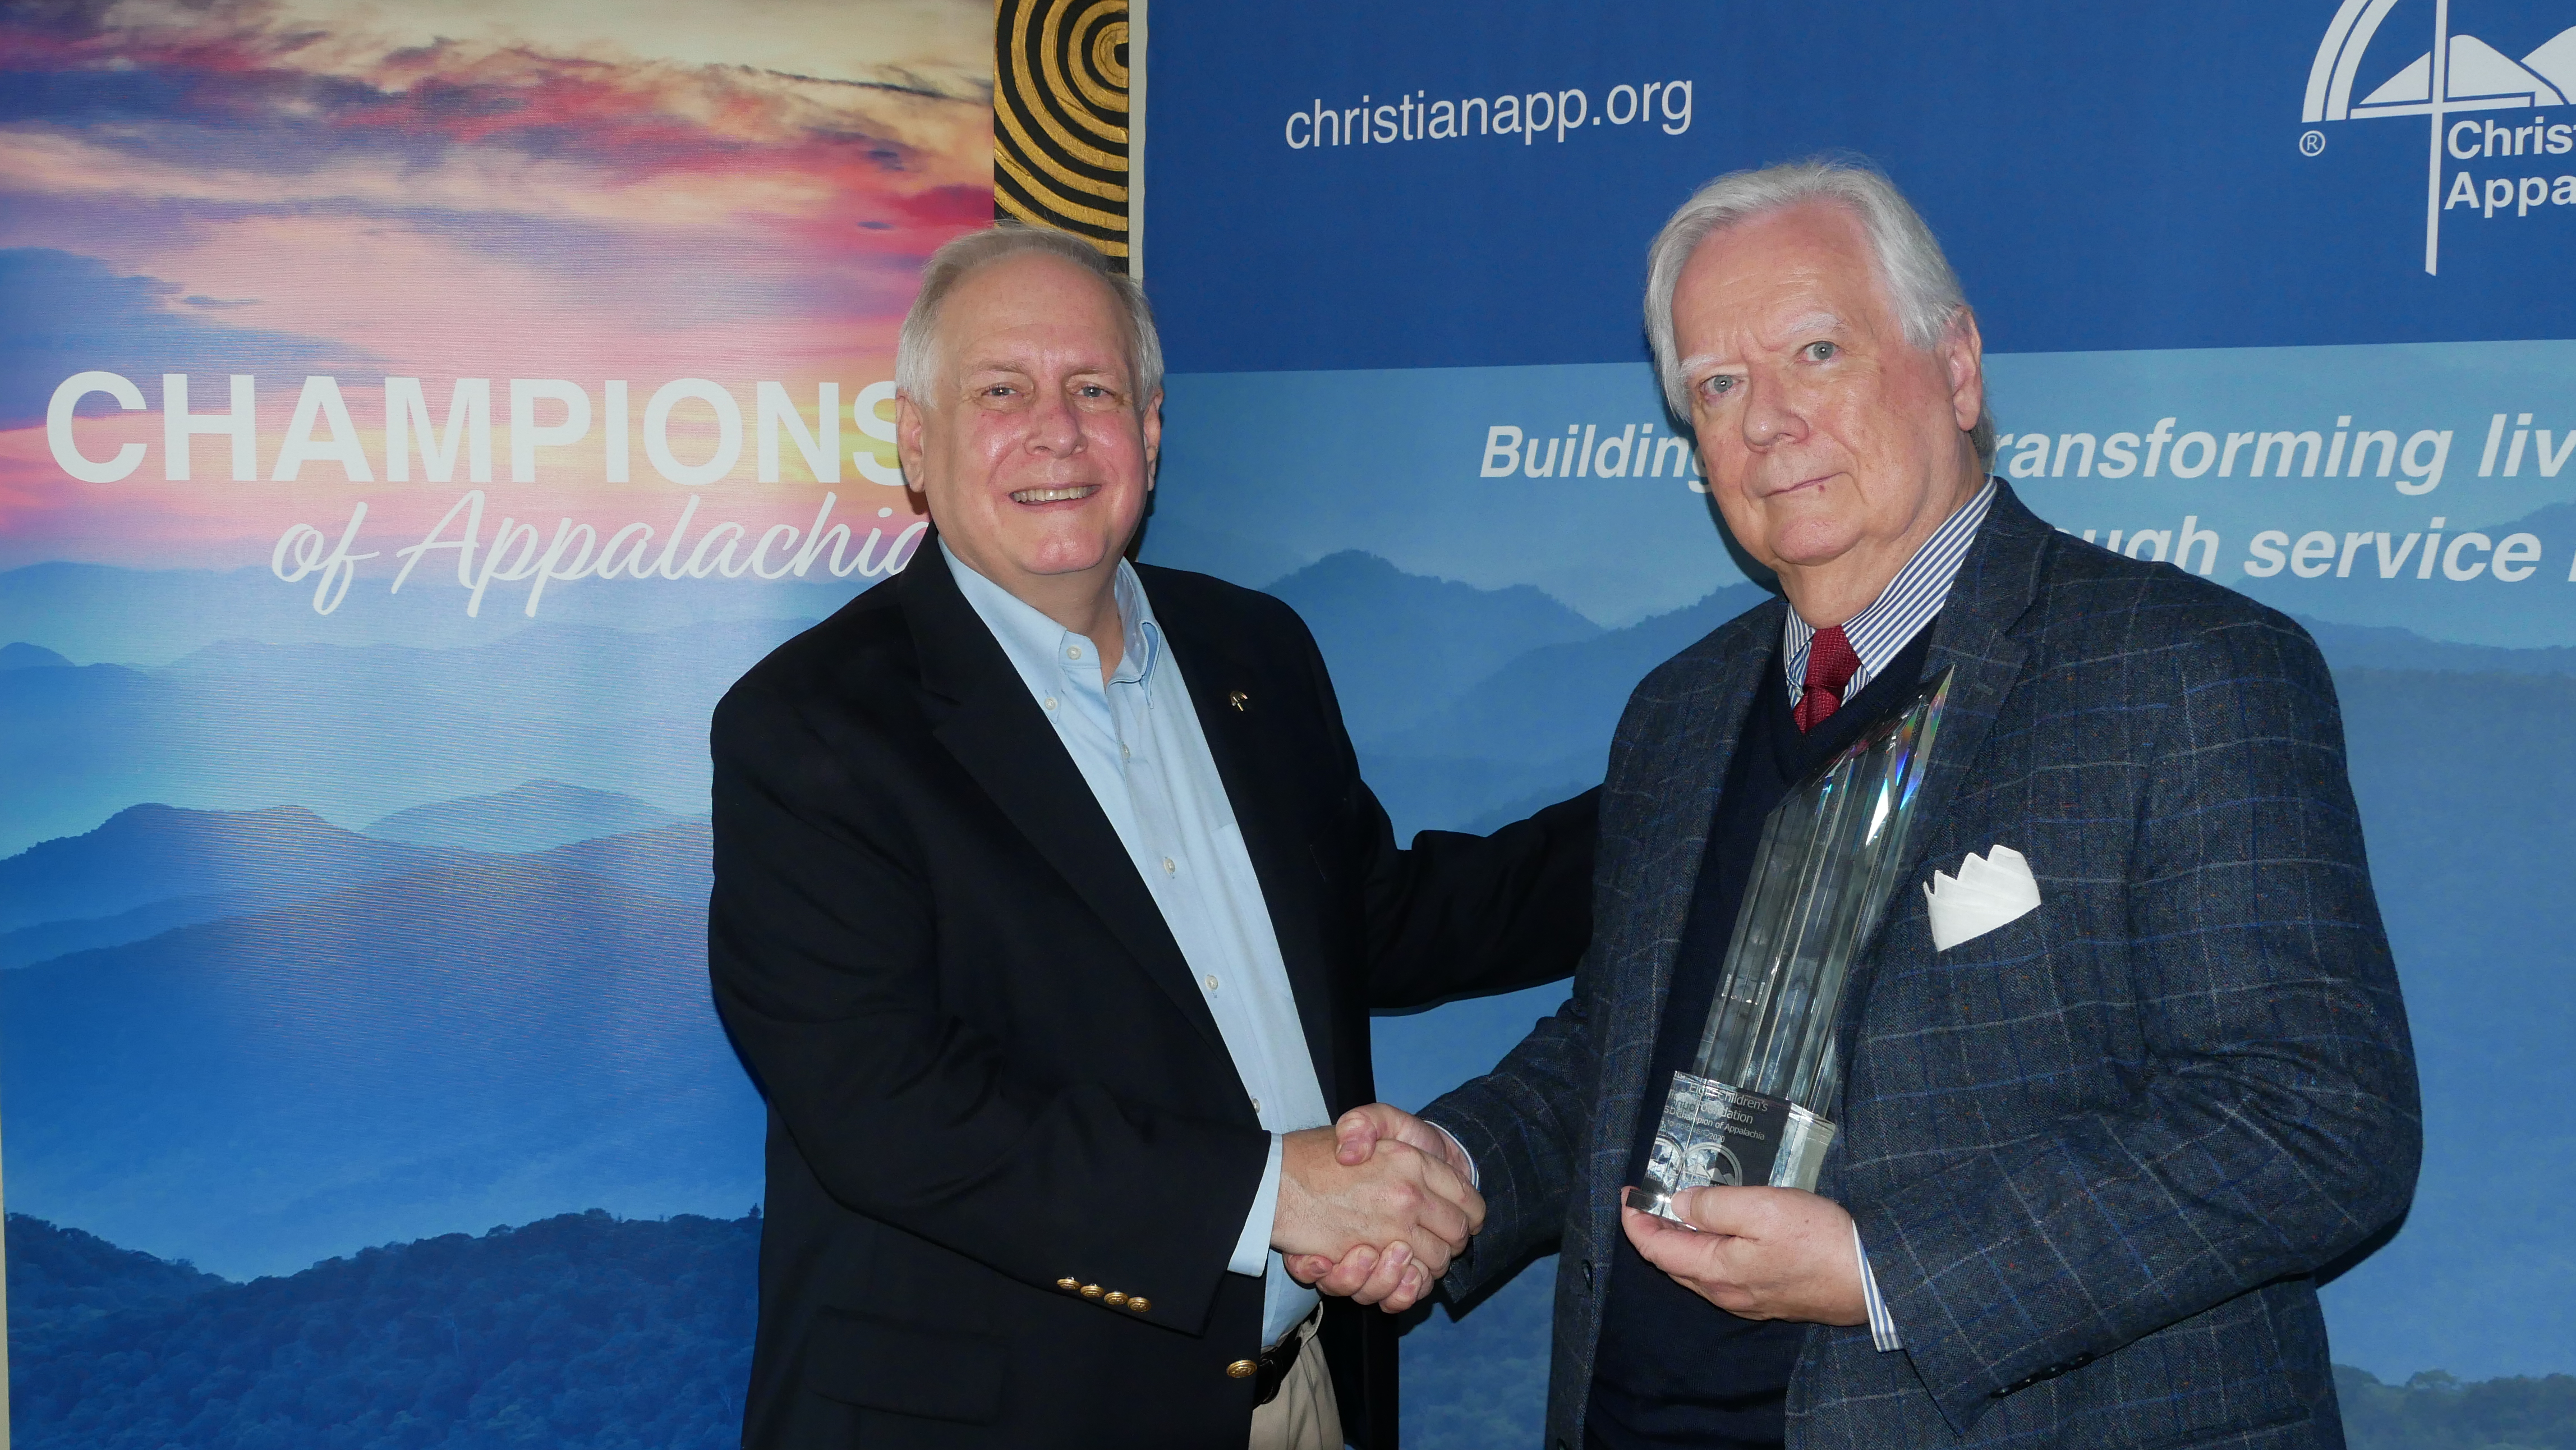 Christian Appalachian Project (CAP) has selected the Elgin Children’s Foundation as its 2020 Champions of Appalachia. Wm Paul Phillips, general counsel, accepted on behalf of the foundation. The award was presented by Guy Adams, president/CEO of CAP.